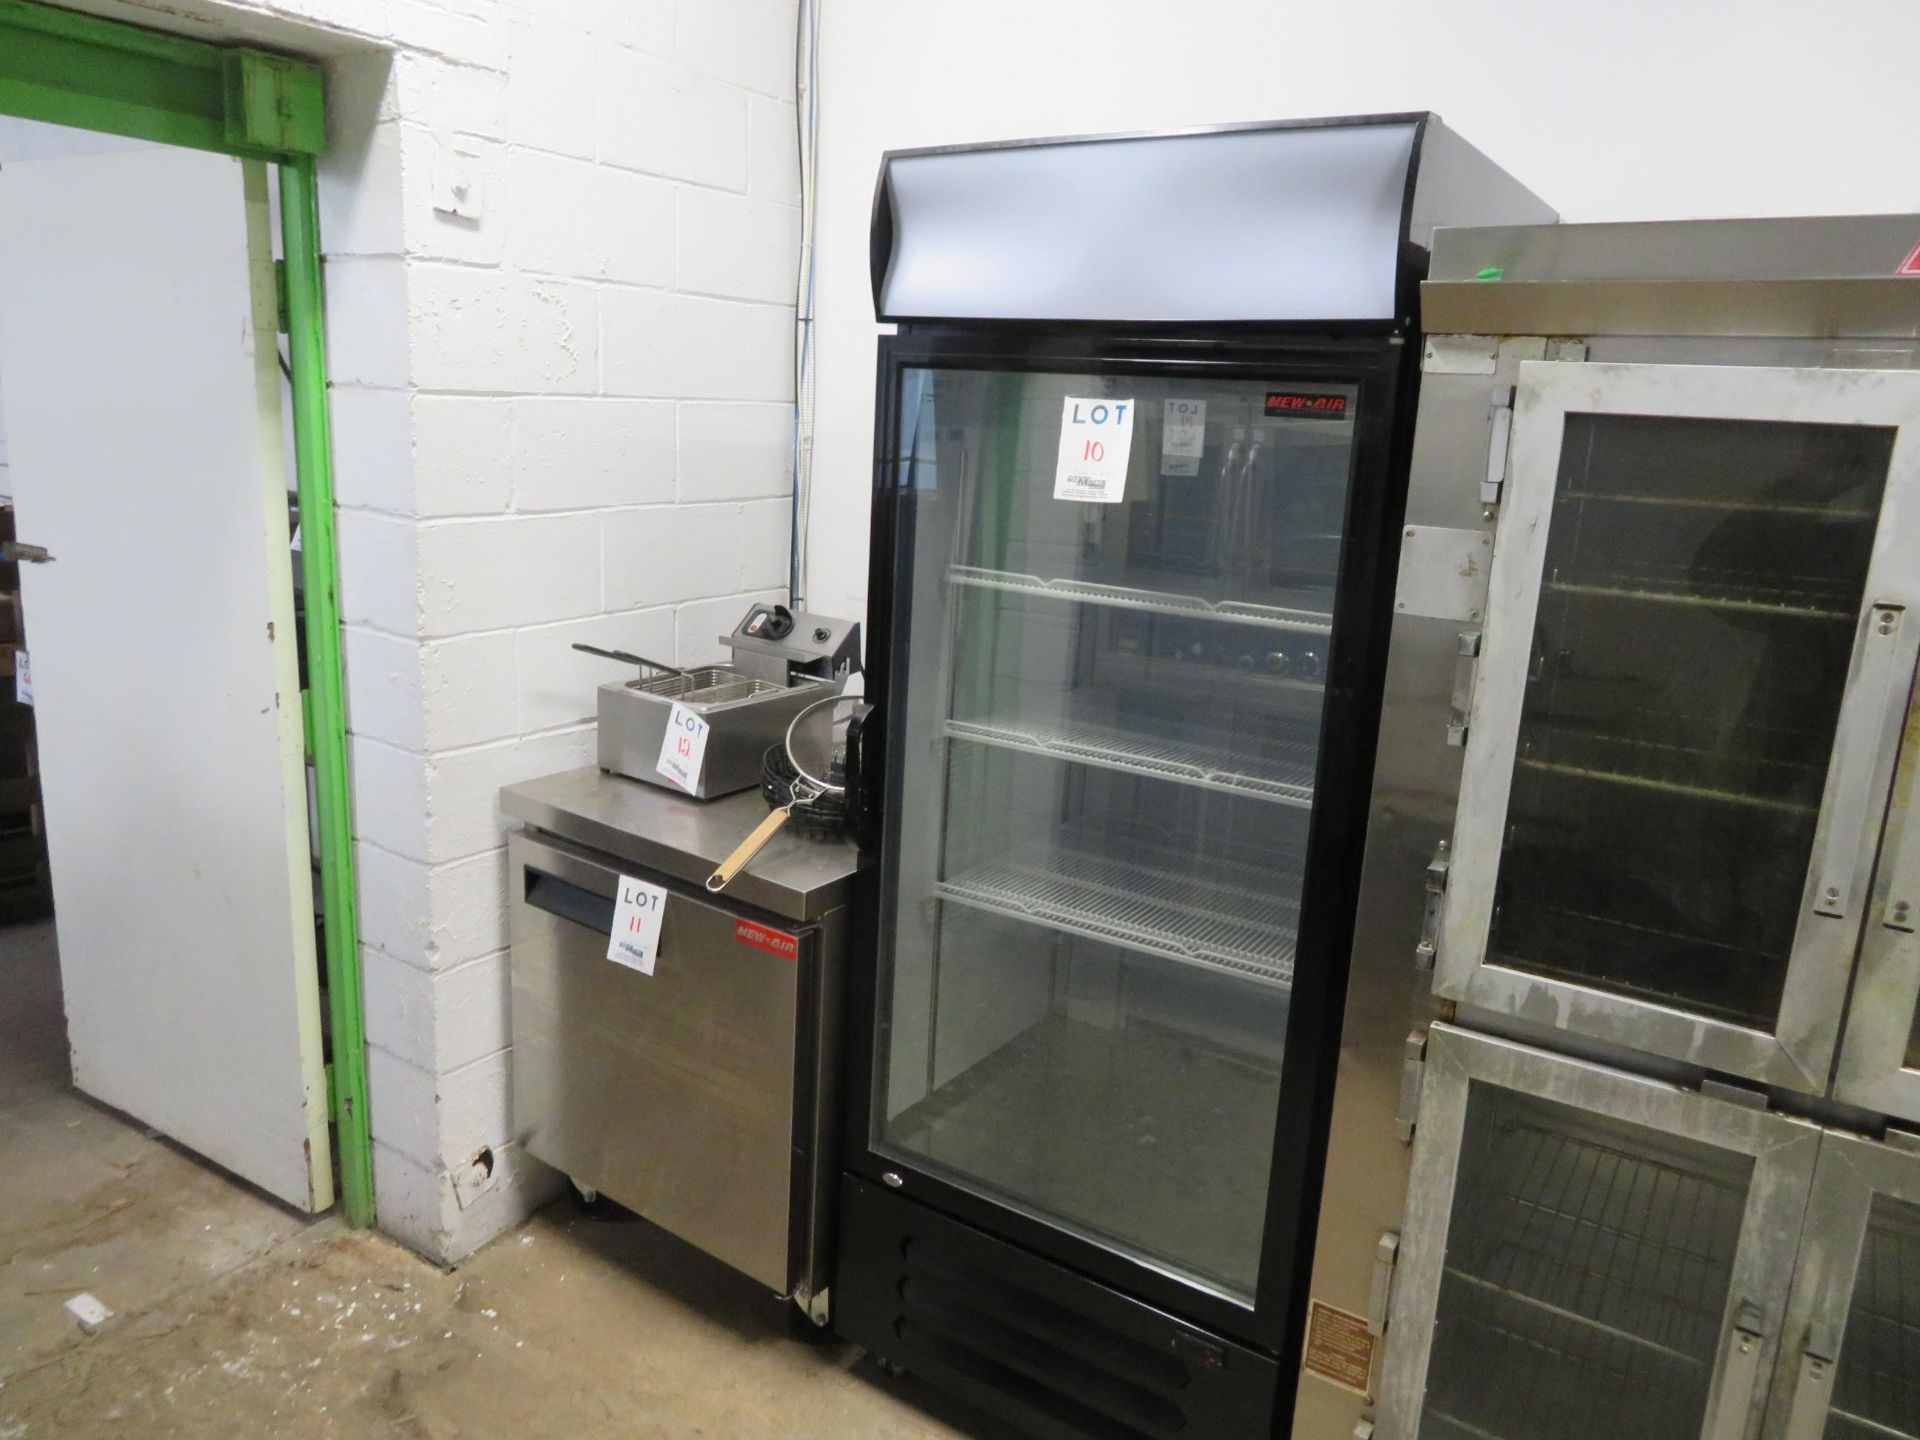 NEW AIR 1 door glass upright refrigerator on wheels, Mod # NGR-068H, approx. 30"w x 30"d x 79"h